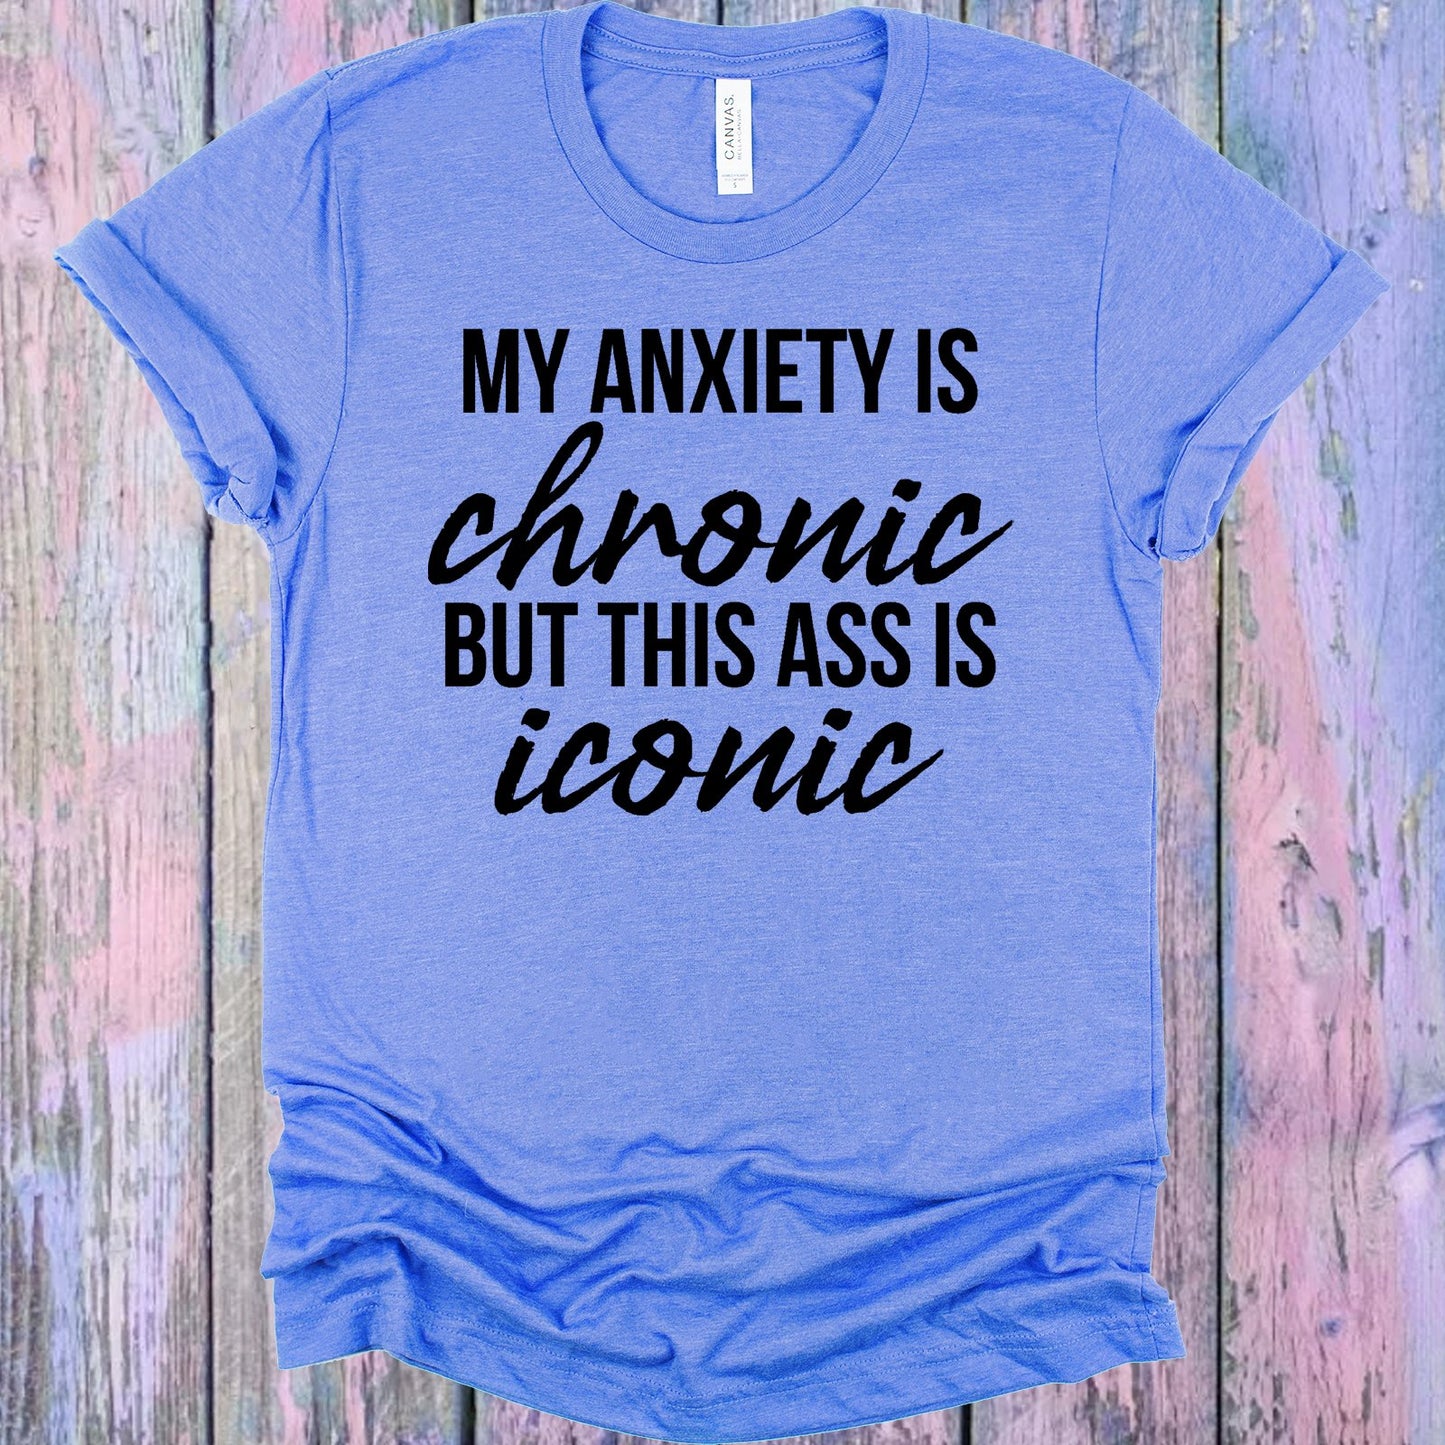 My Anxiety Is Chronic But This A** Iconic Graphic Tee Graphic Tee